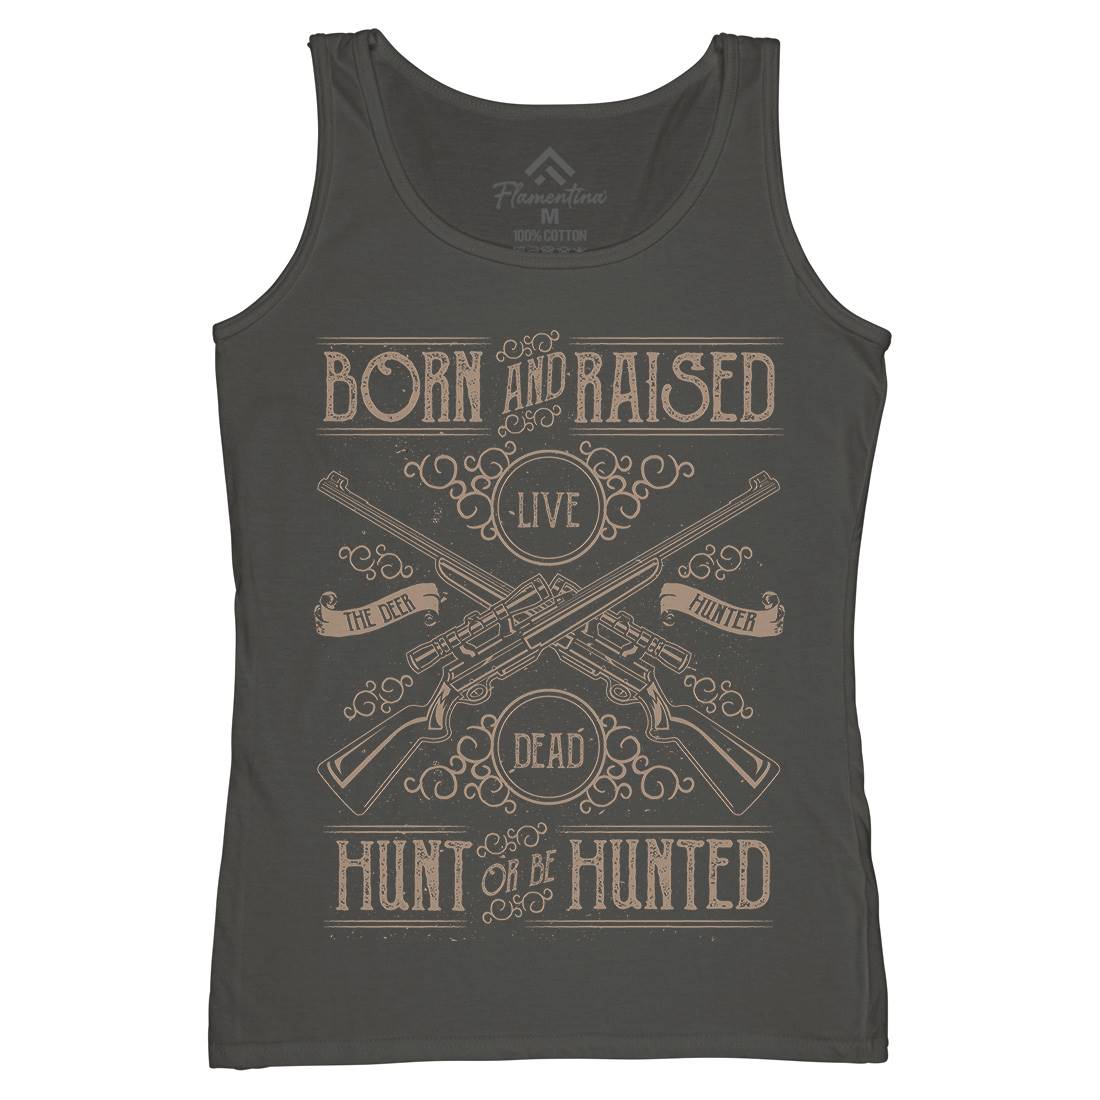 Hunt Or Be Hunted Womens Organic Tank Top Vest Sport A069